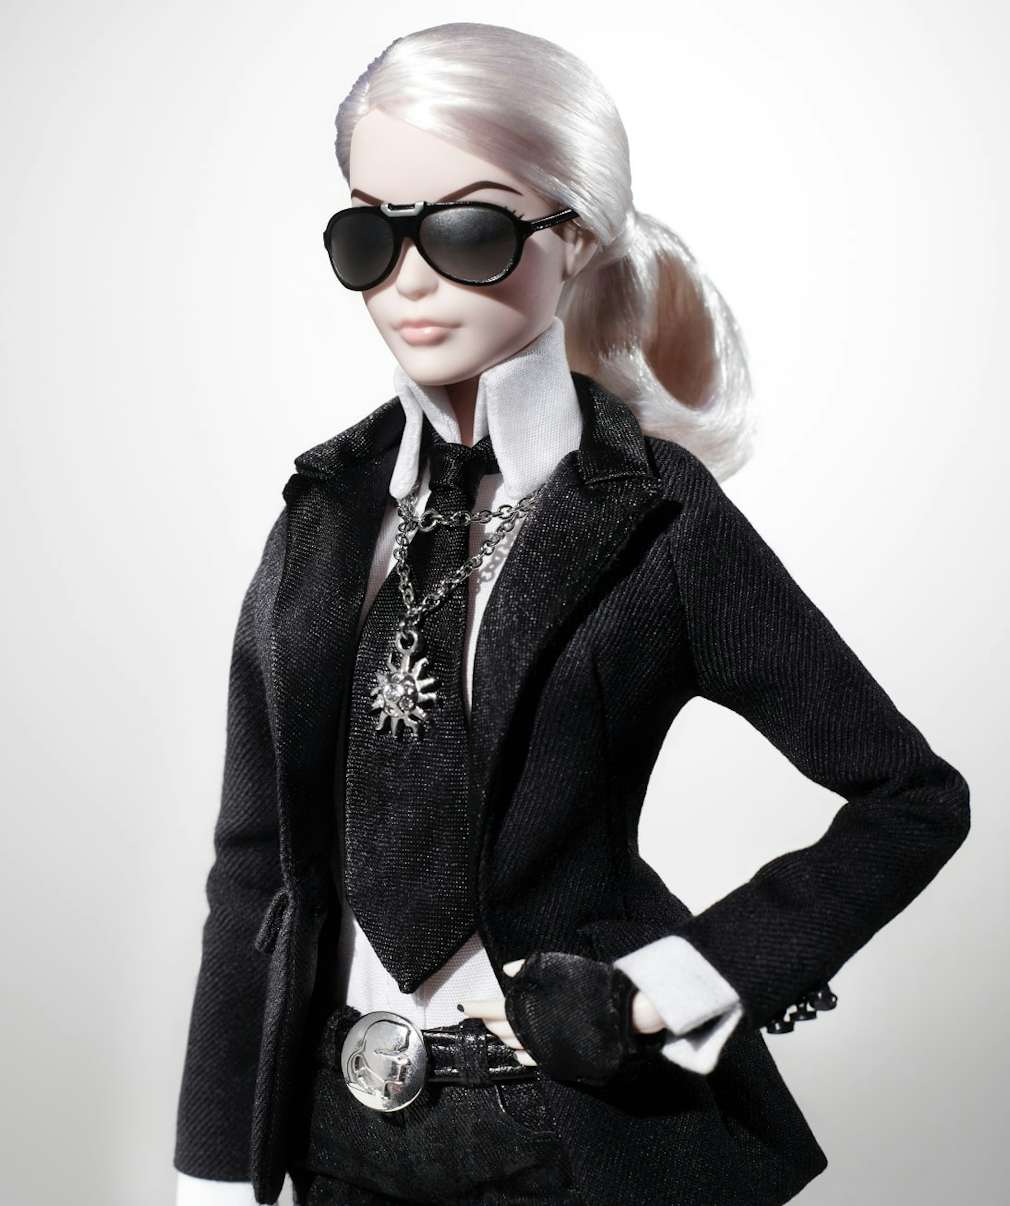 A look at Barbie's biggest fashion collaborations and their iconic